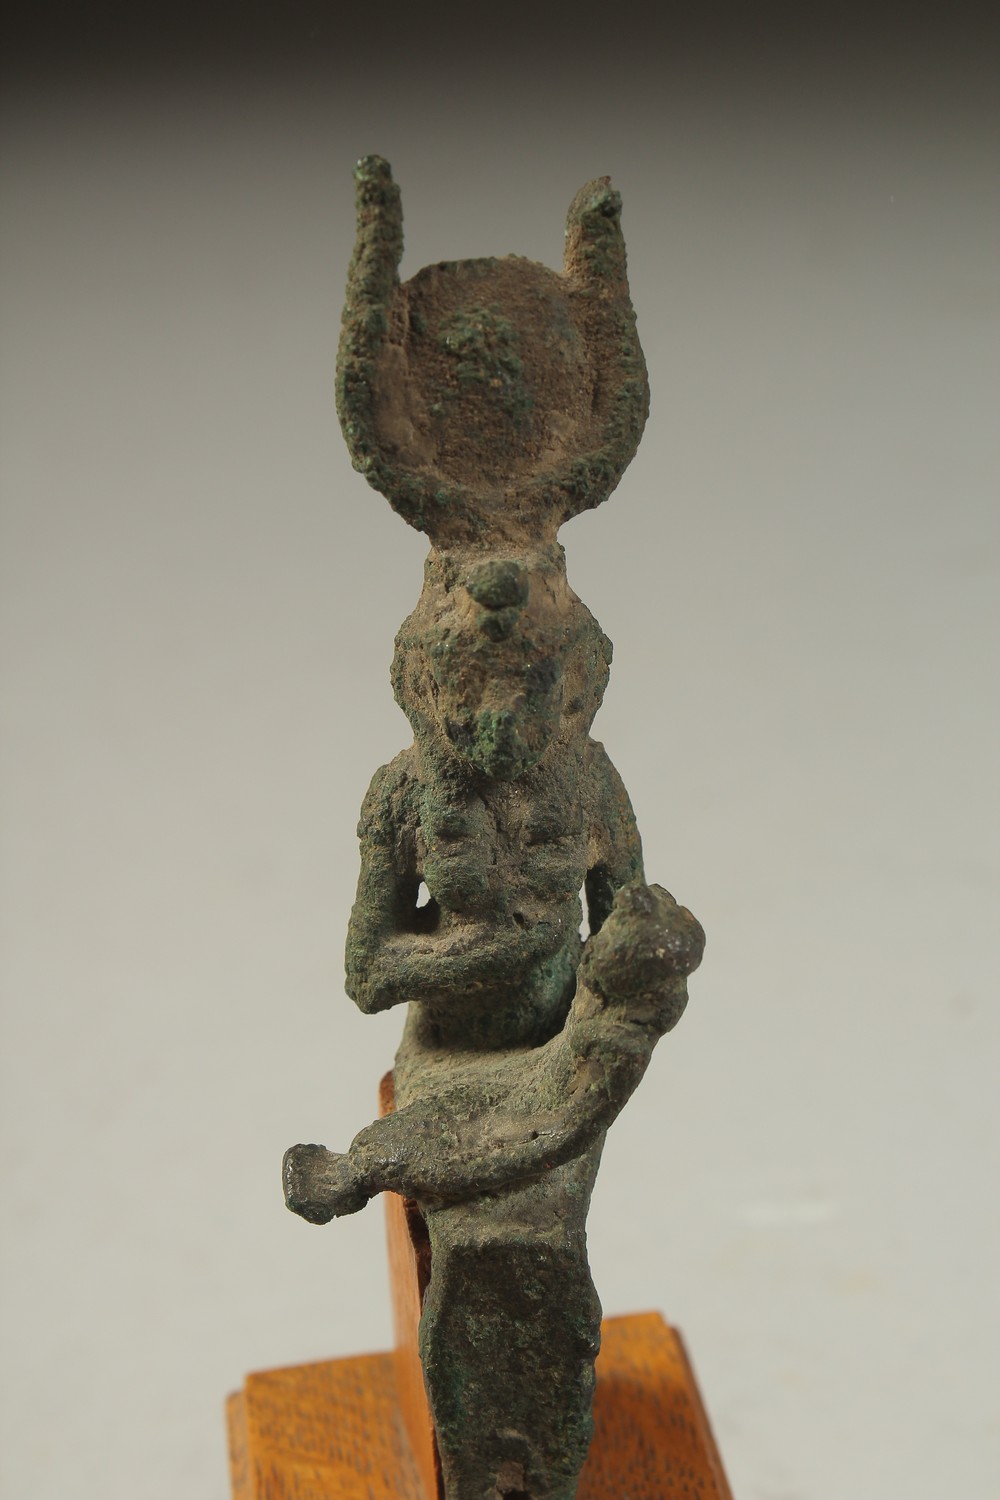 A RARE ANCIENT EYGPTIAN BRONZE FIGURE OF ISIS NURTURING HORUS, on a wooden stand, bronze 12cm high. - Image 3 of 4